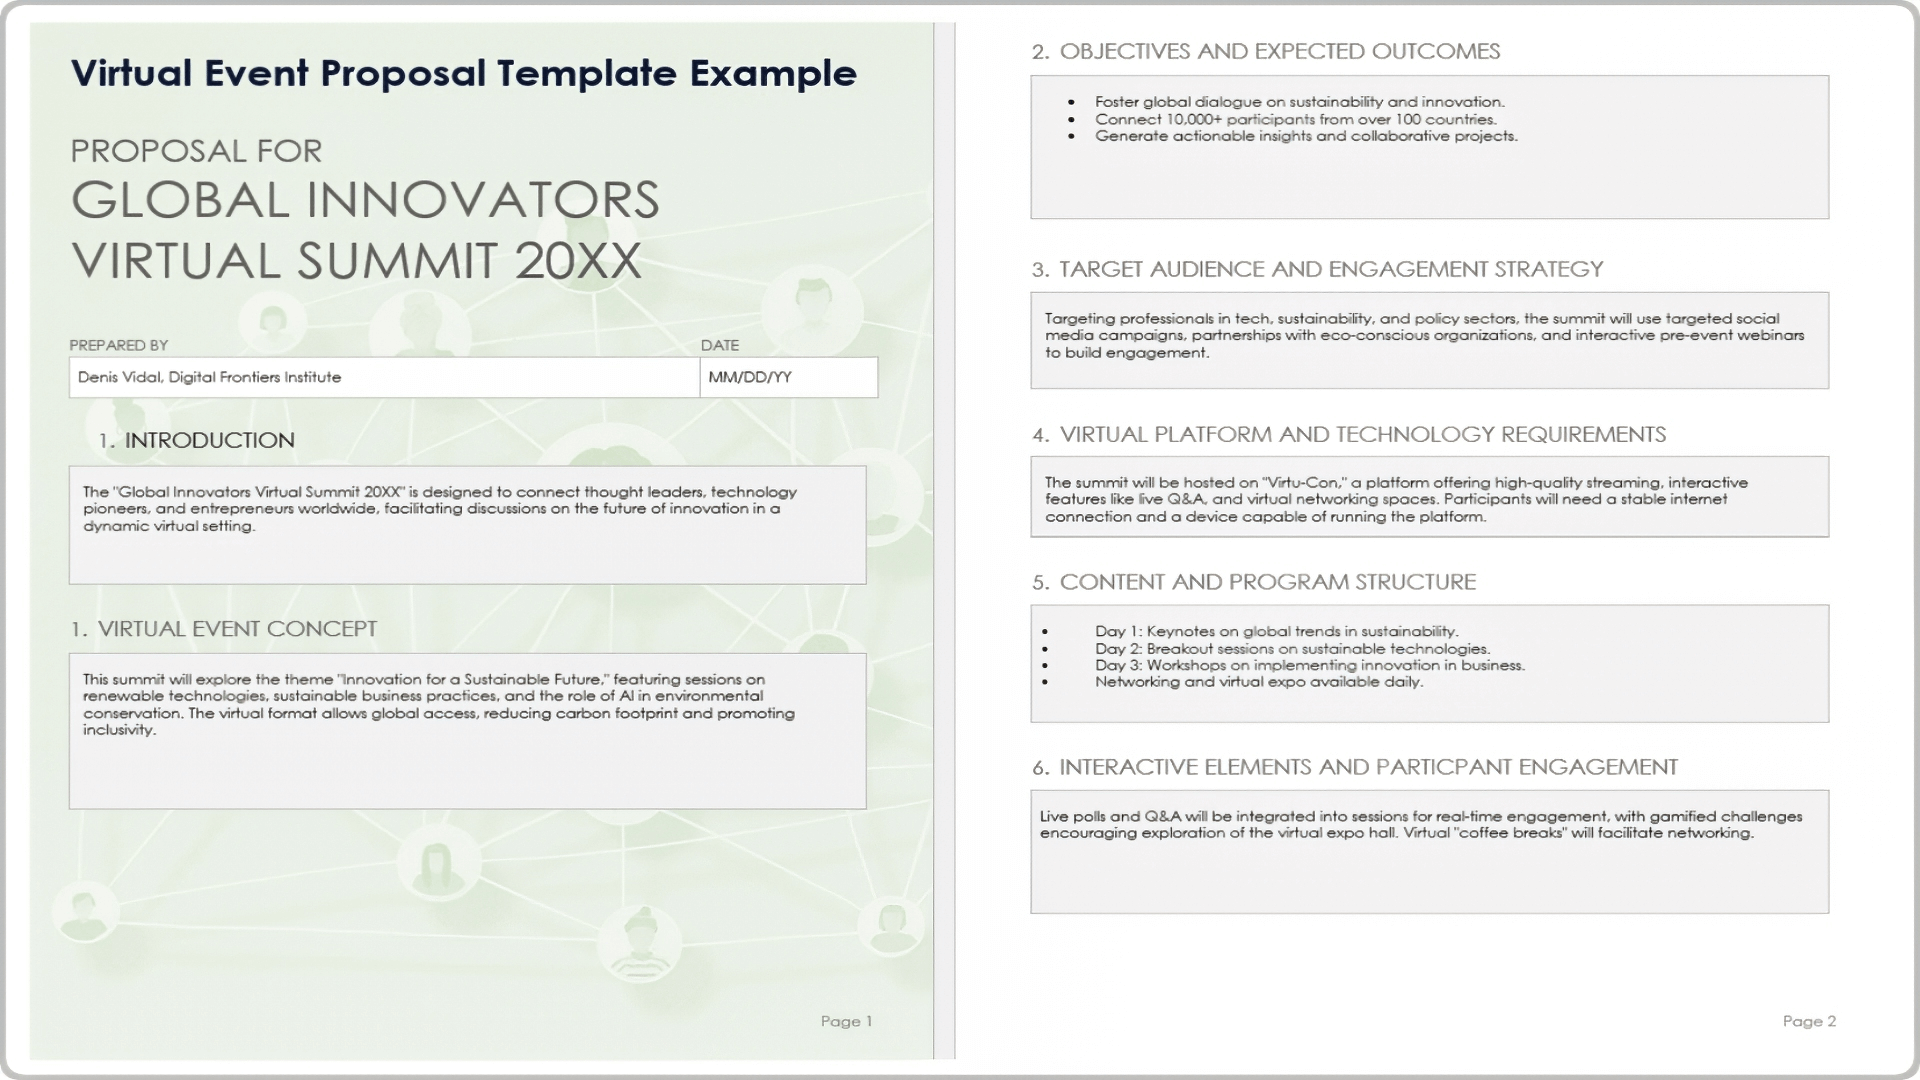 Virtual Event Proposal Template Example